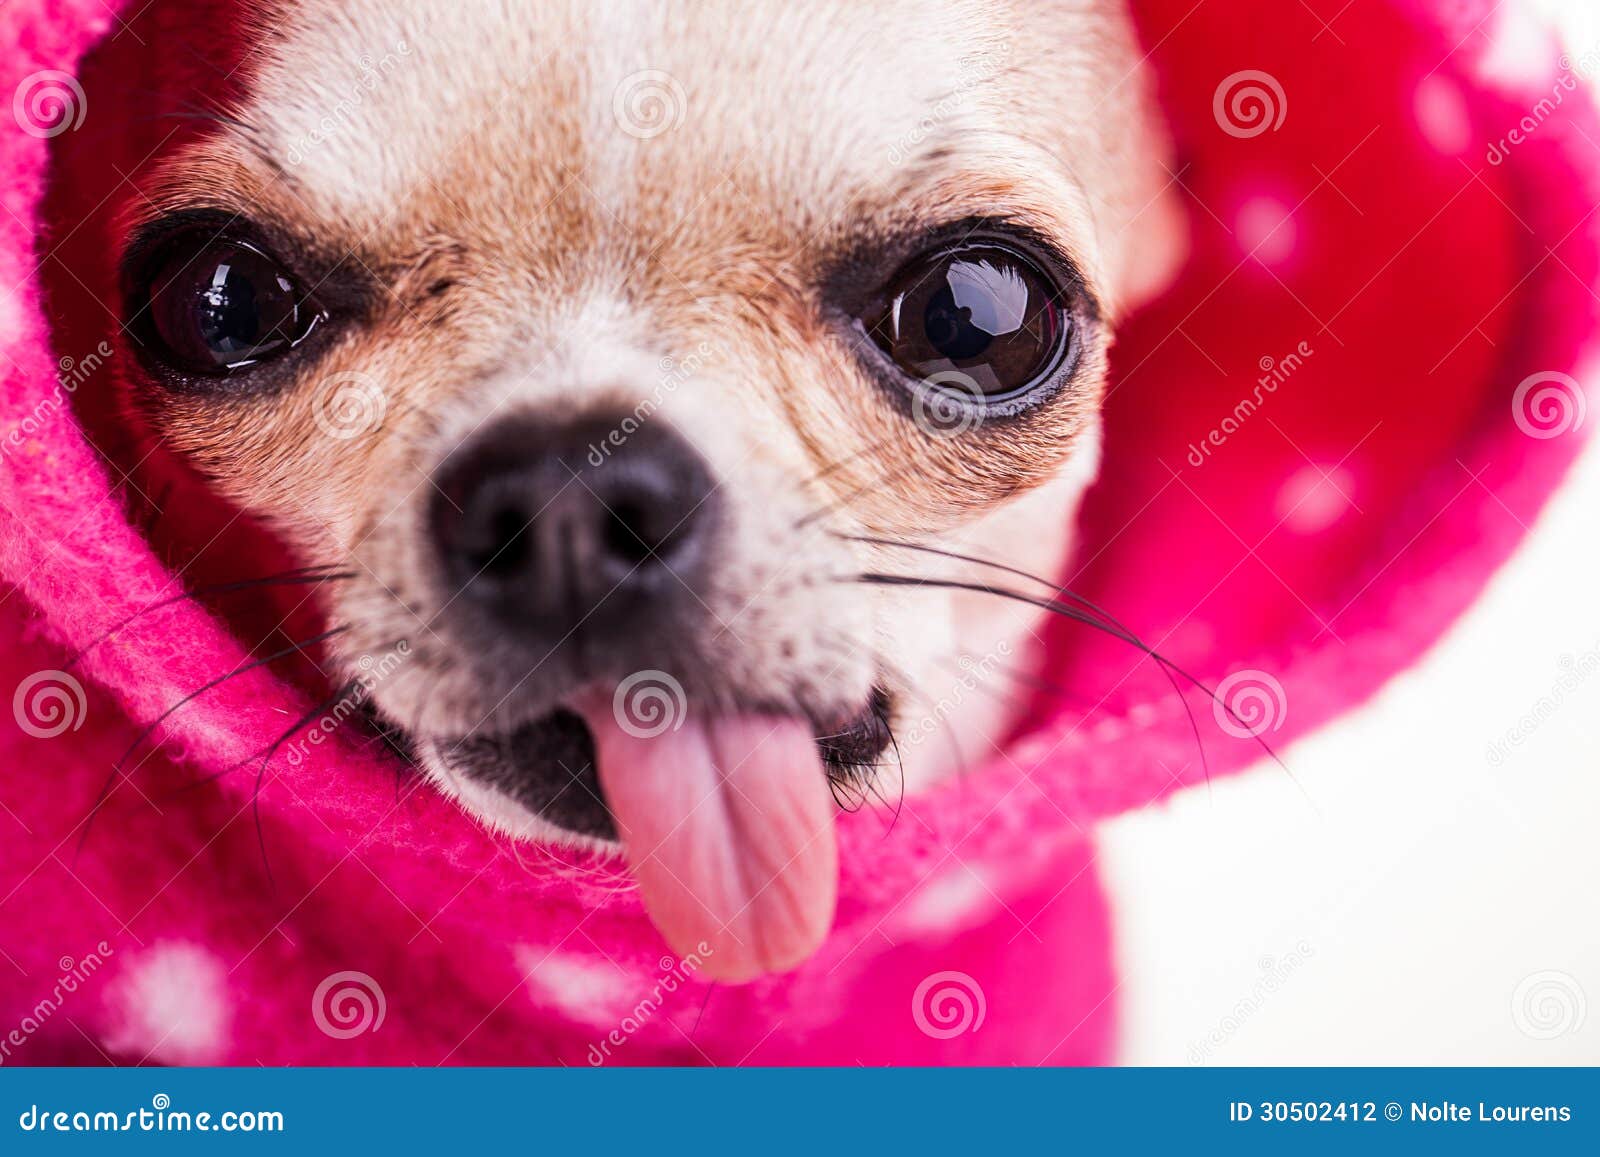 little-chihuahua-staring-eyes-tongue-out-close-up-cute-chihuahuas-face-big-shiney-hanging-dressed-pink-30502412.jpg